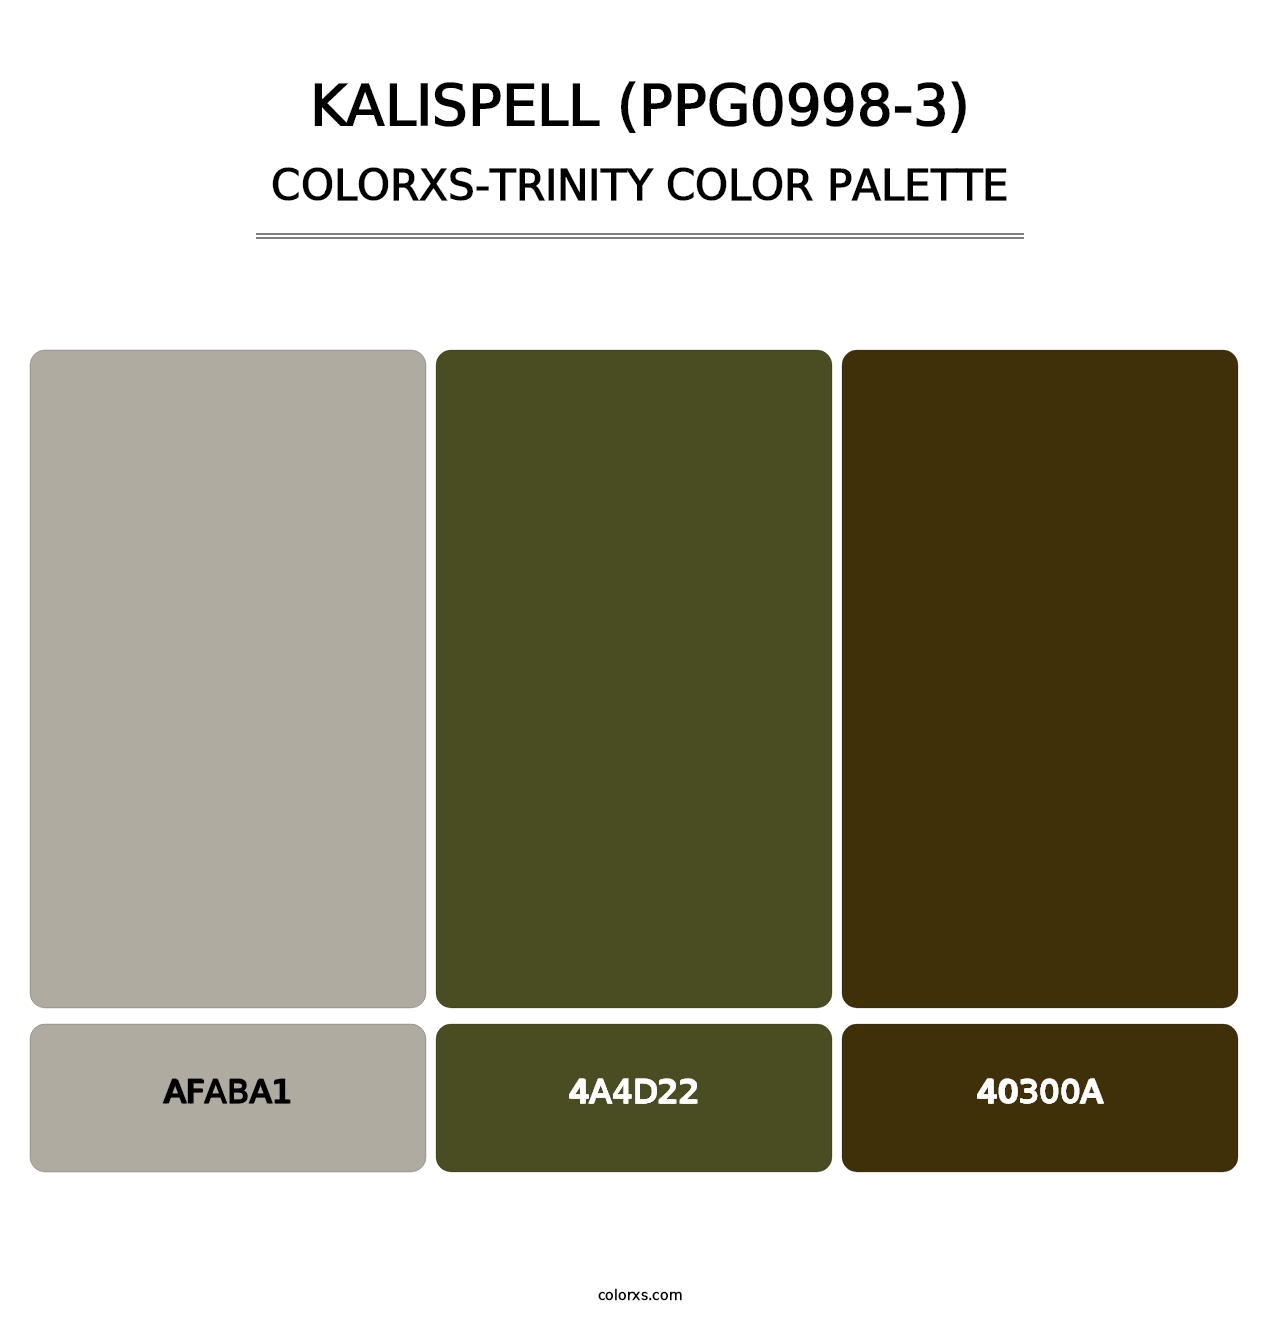 Kalispell (PPG0998-3) - Colorxs Trinity Palette